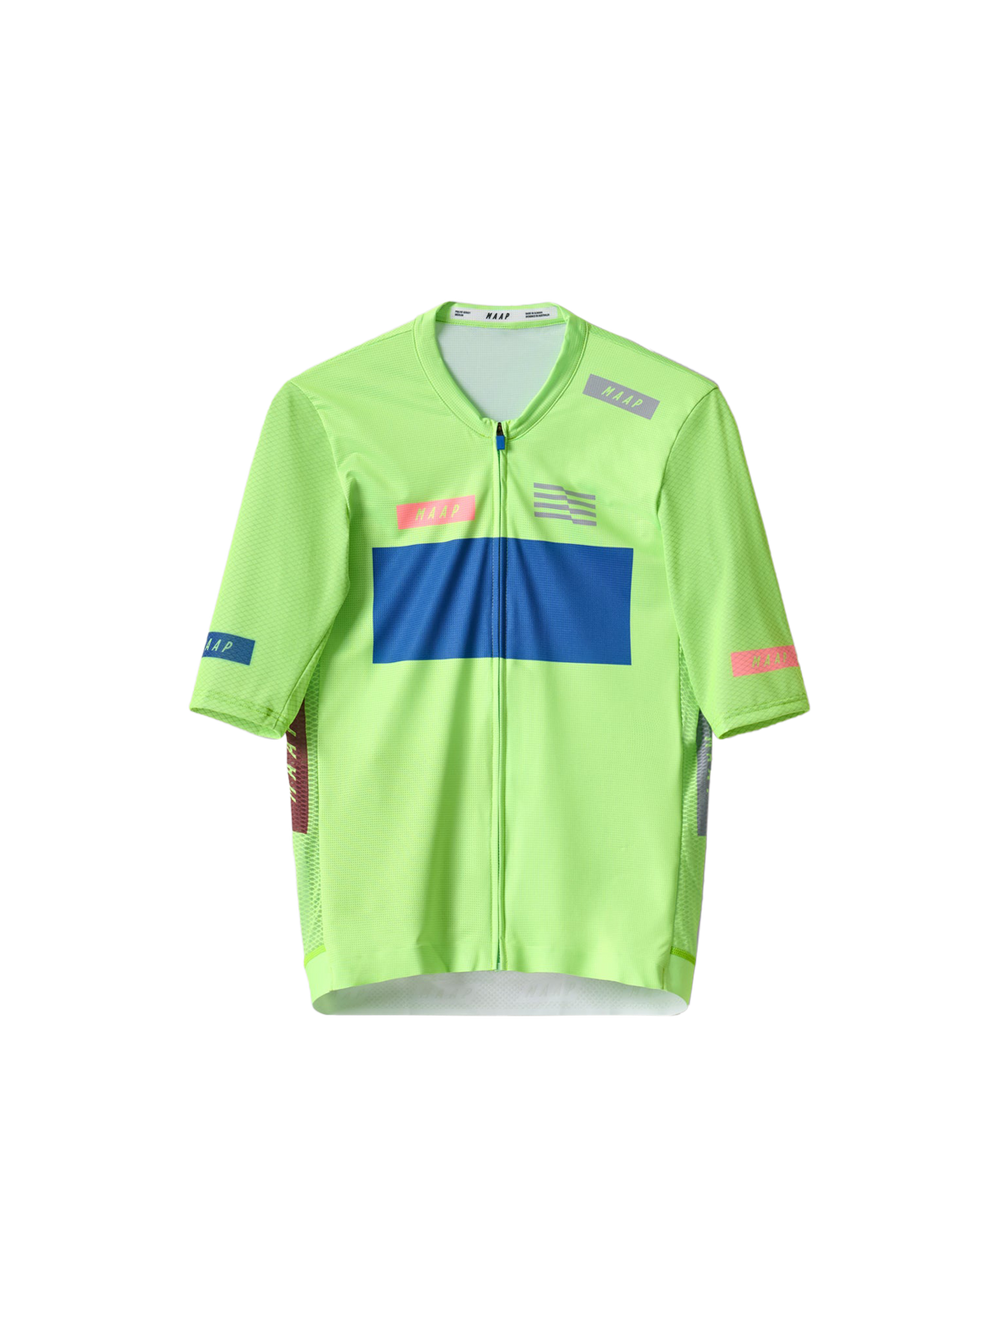 Product Image for System Pro Air Jersey